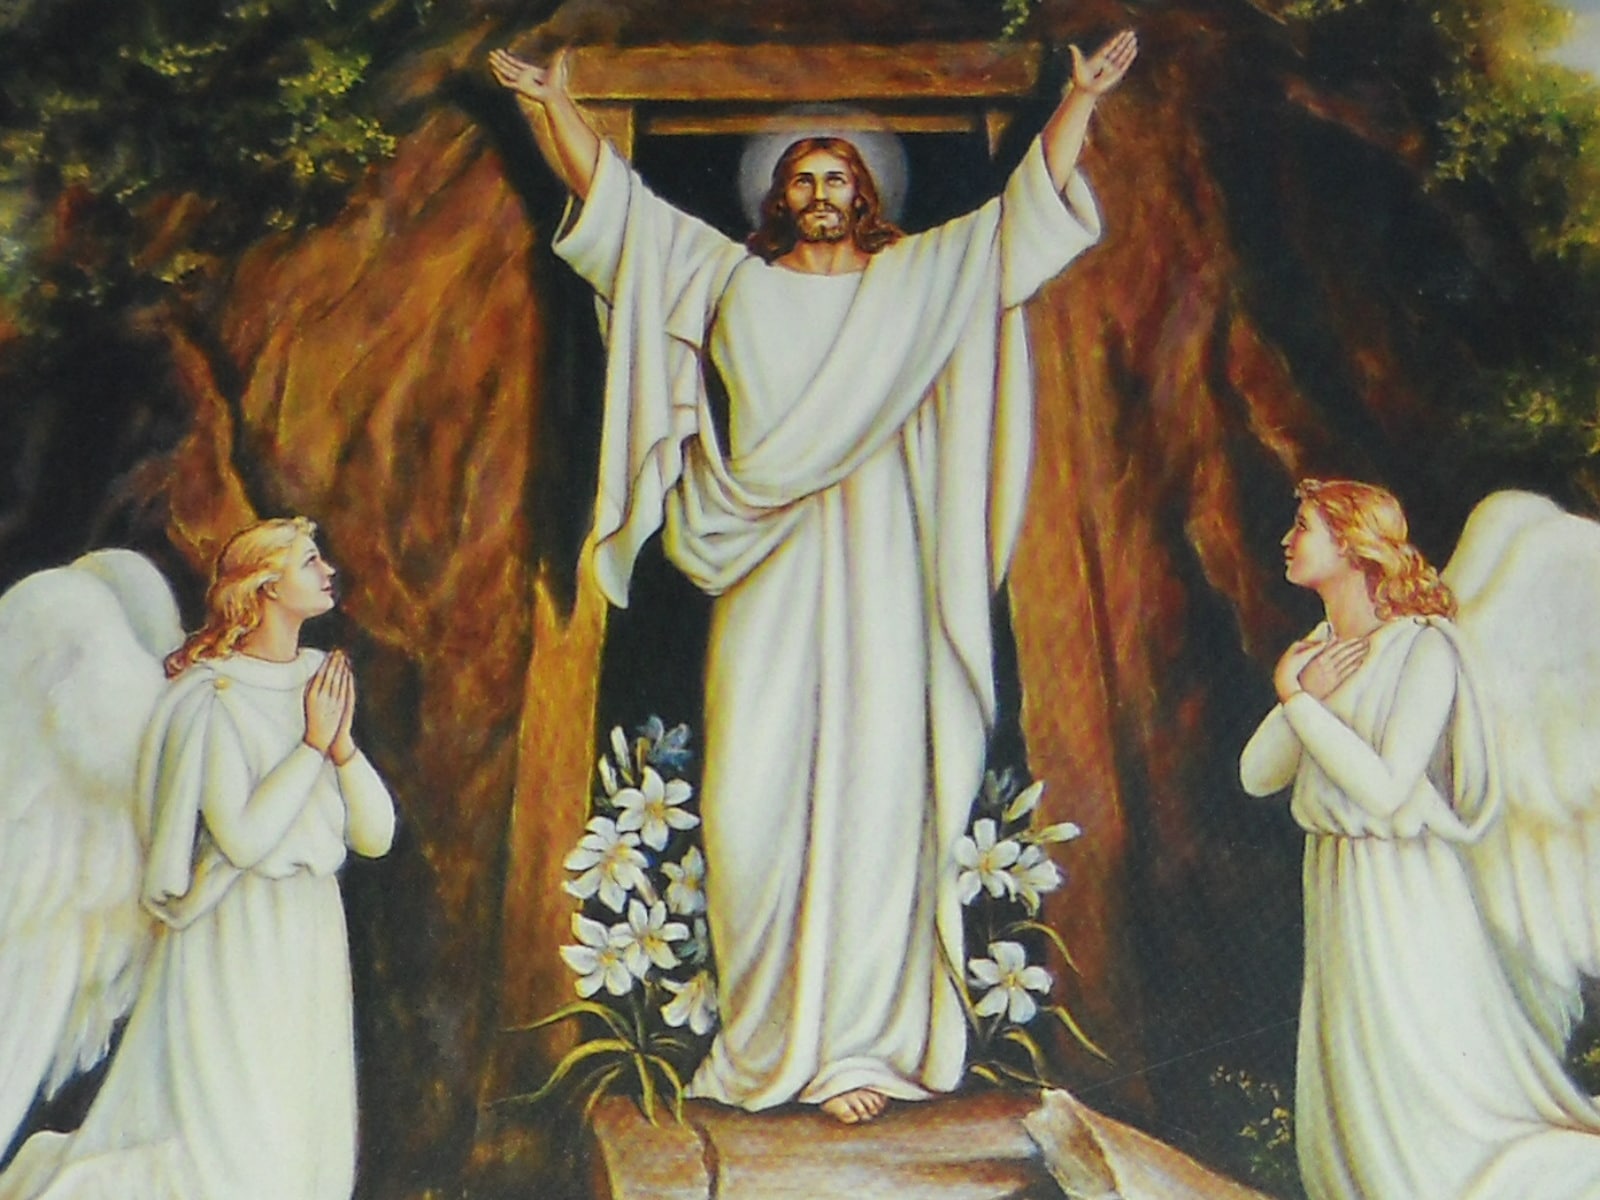 Easter Images With Jesus - Photos